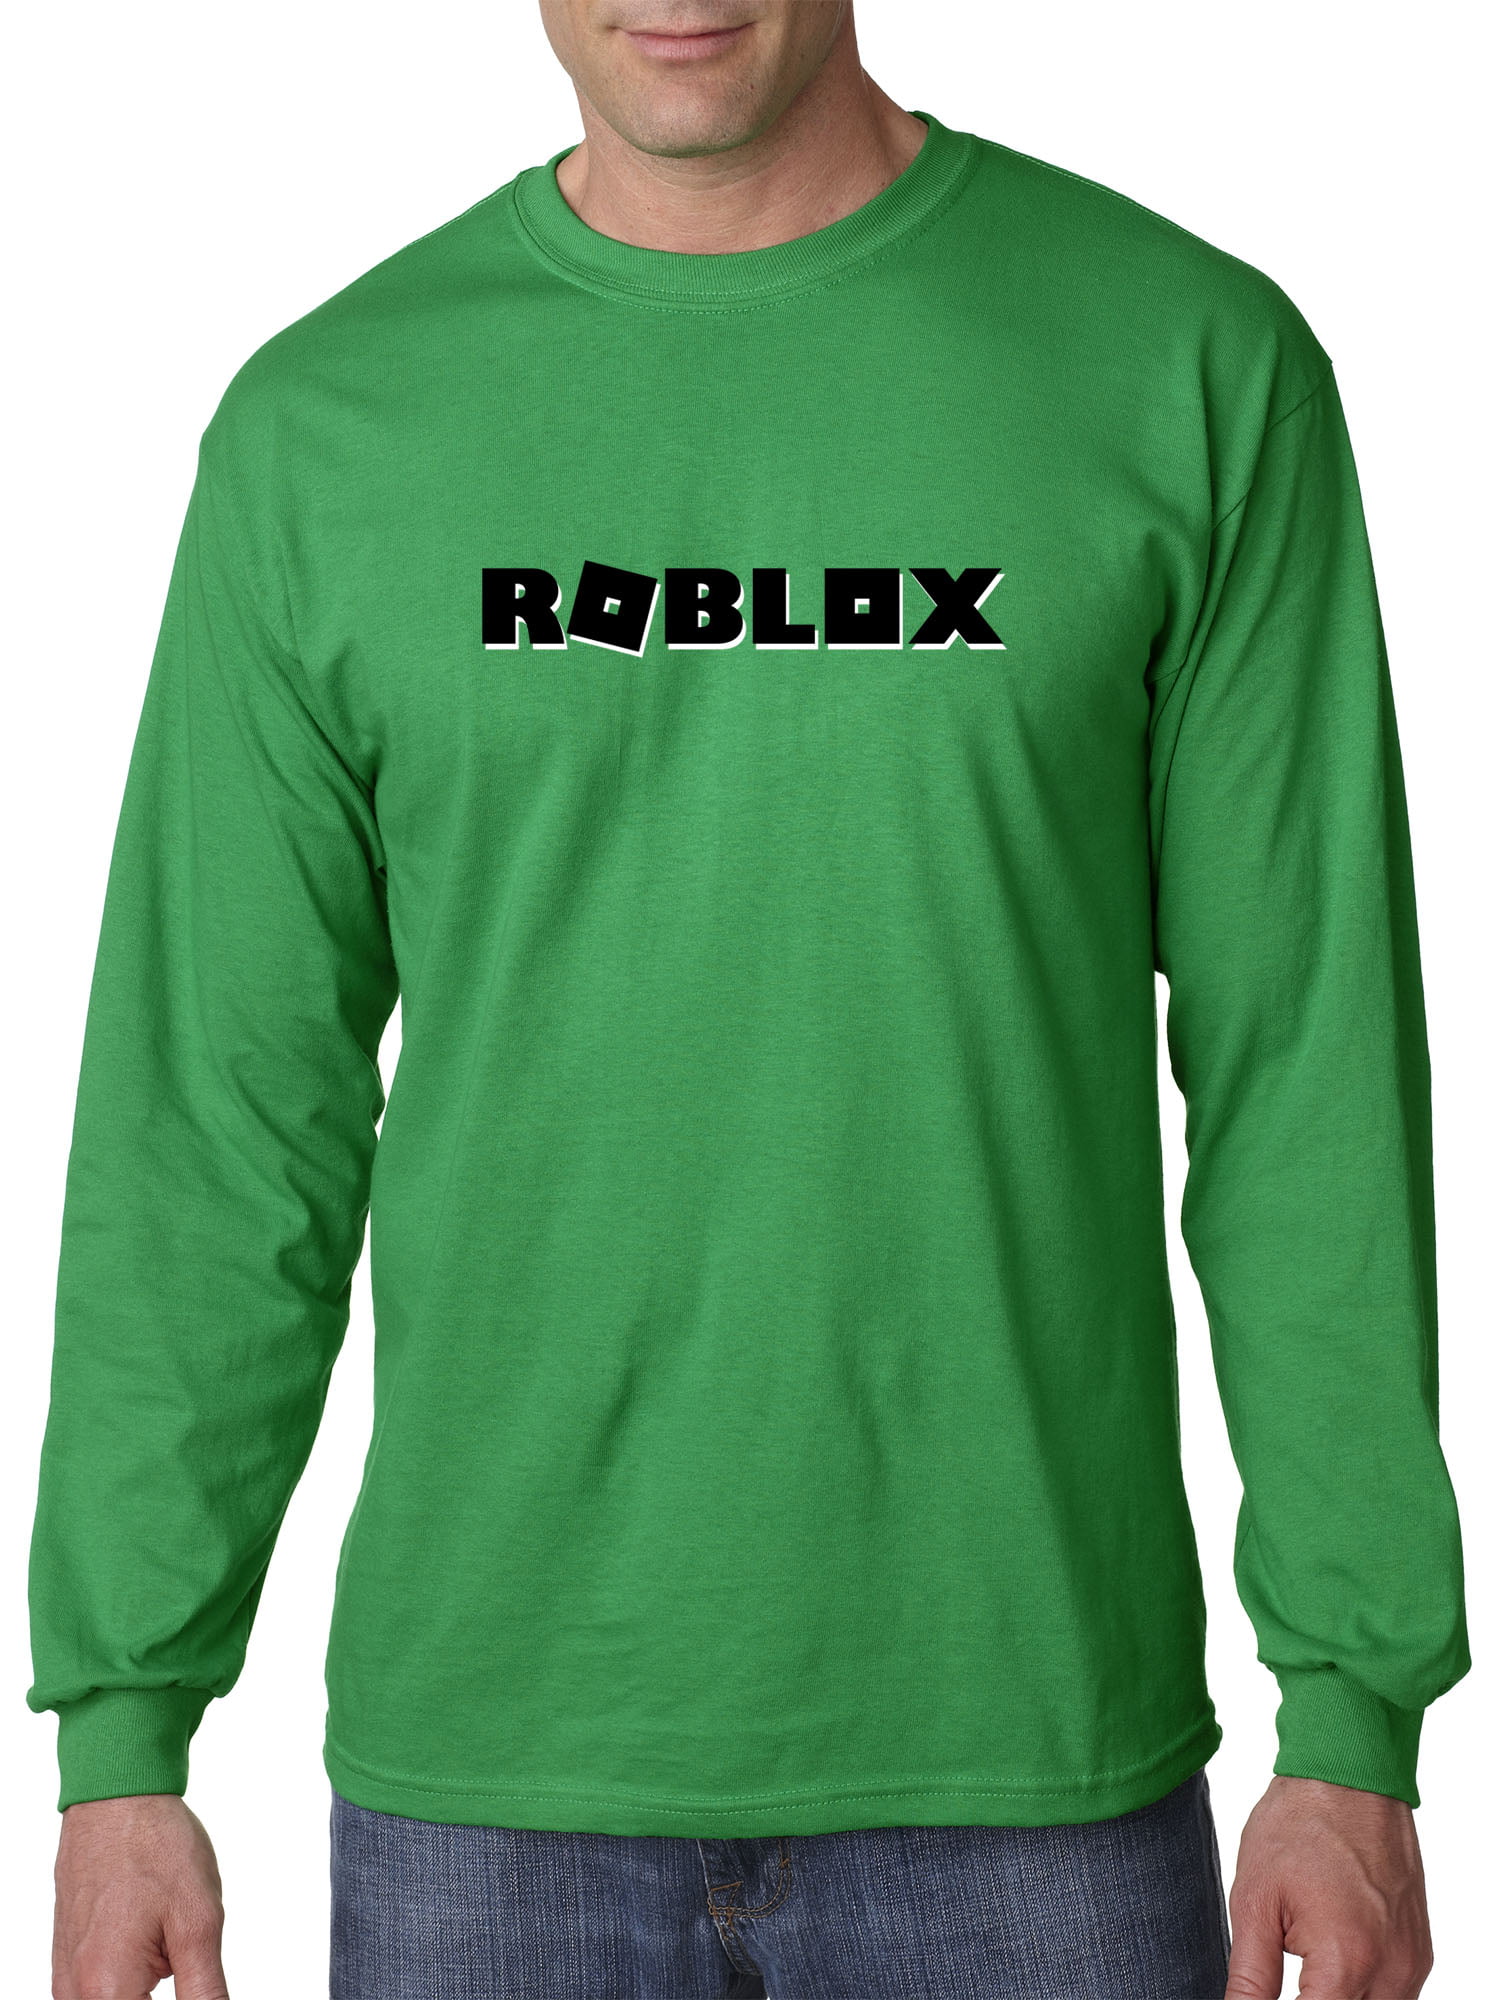 Trendy Usa Trendy Usa 1168 Unisex Long Sleeve T Shirt - how to get free t shirts no bc needed roblox